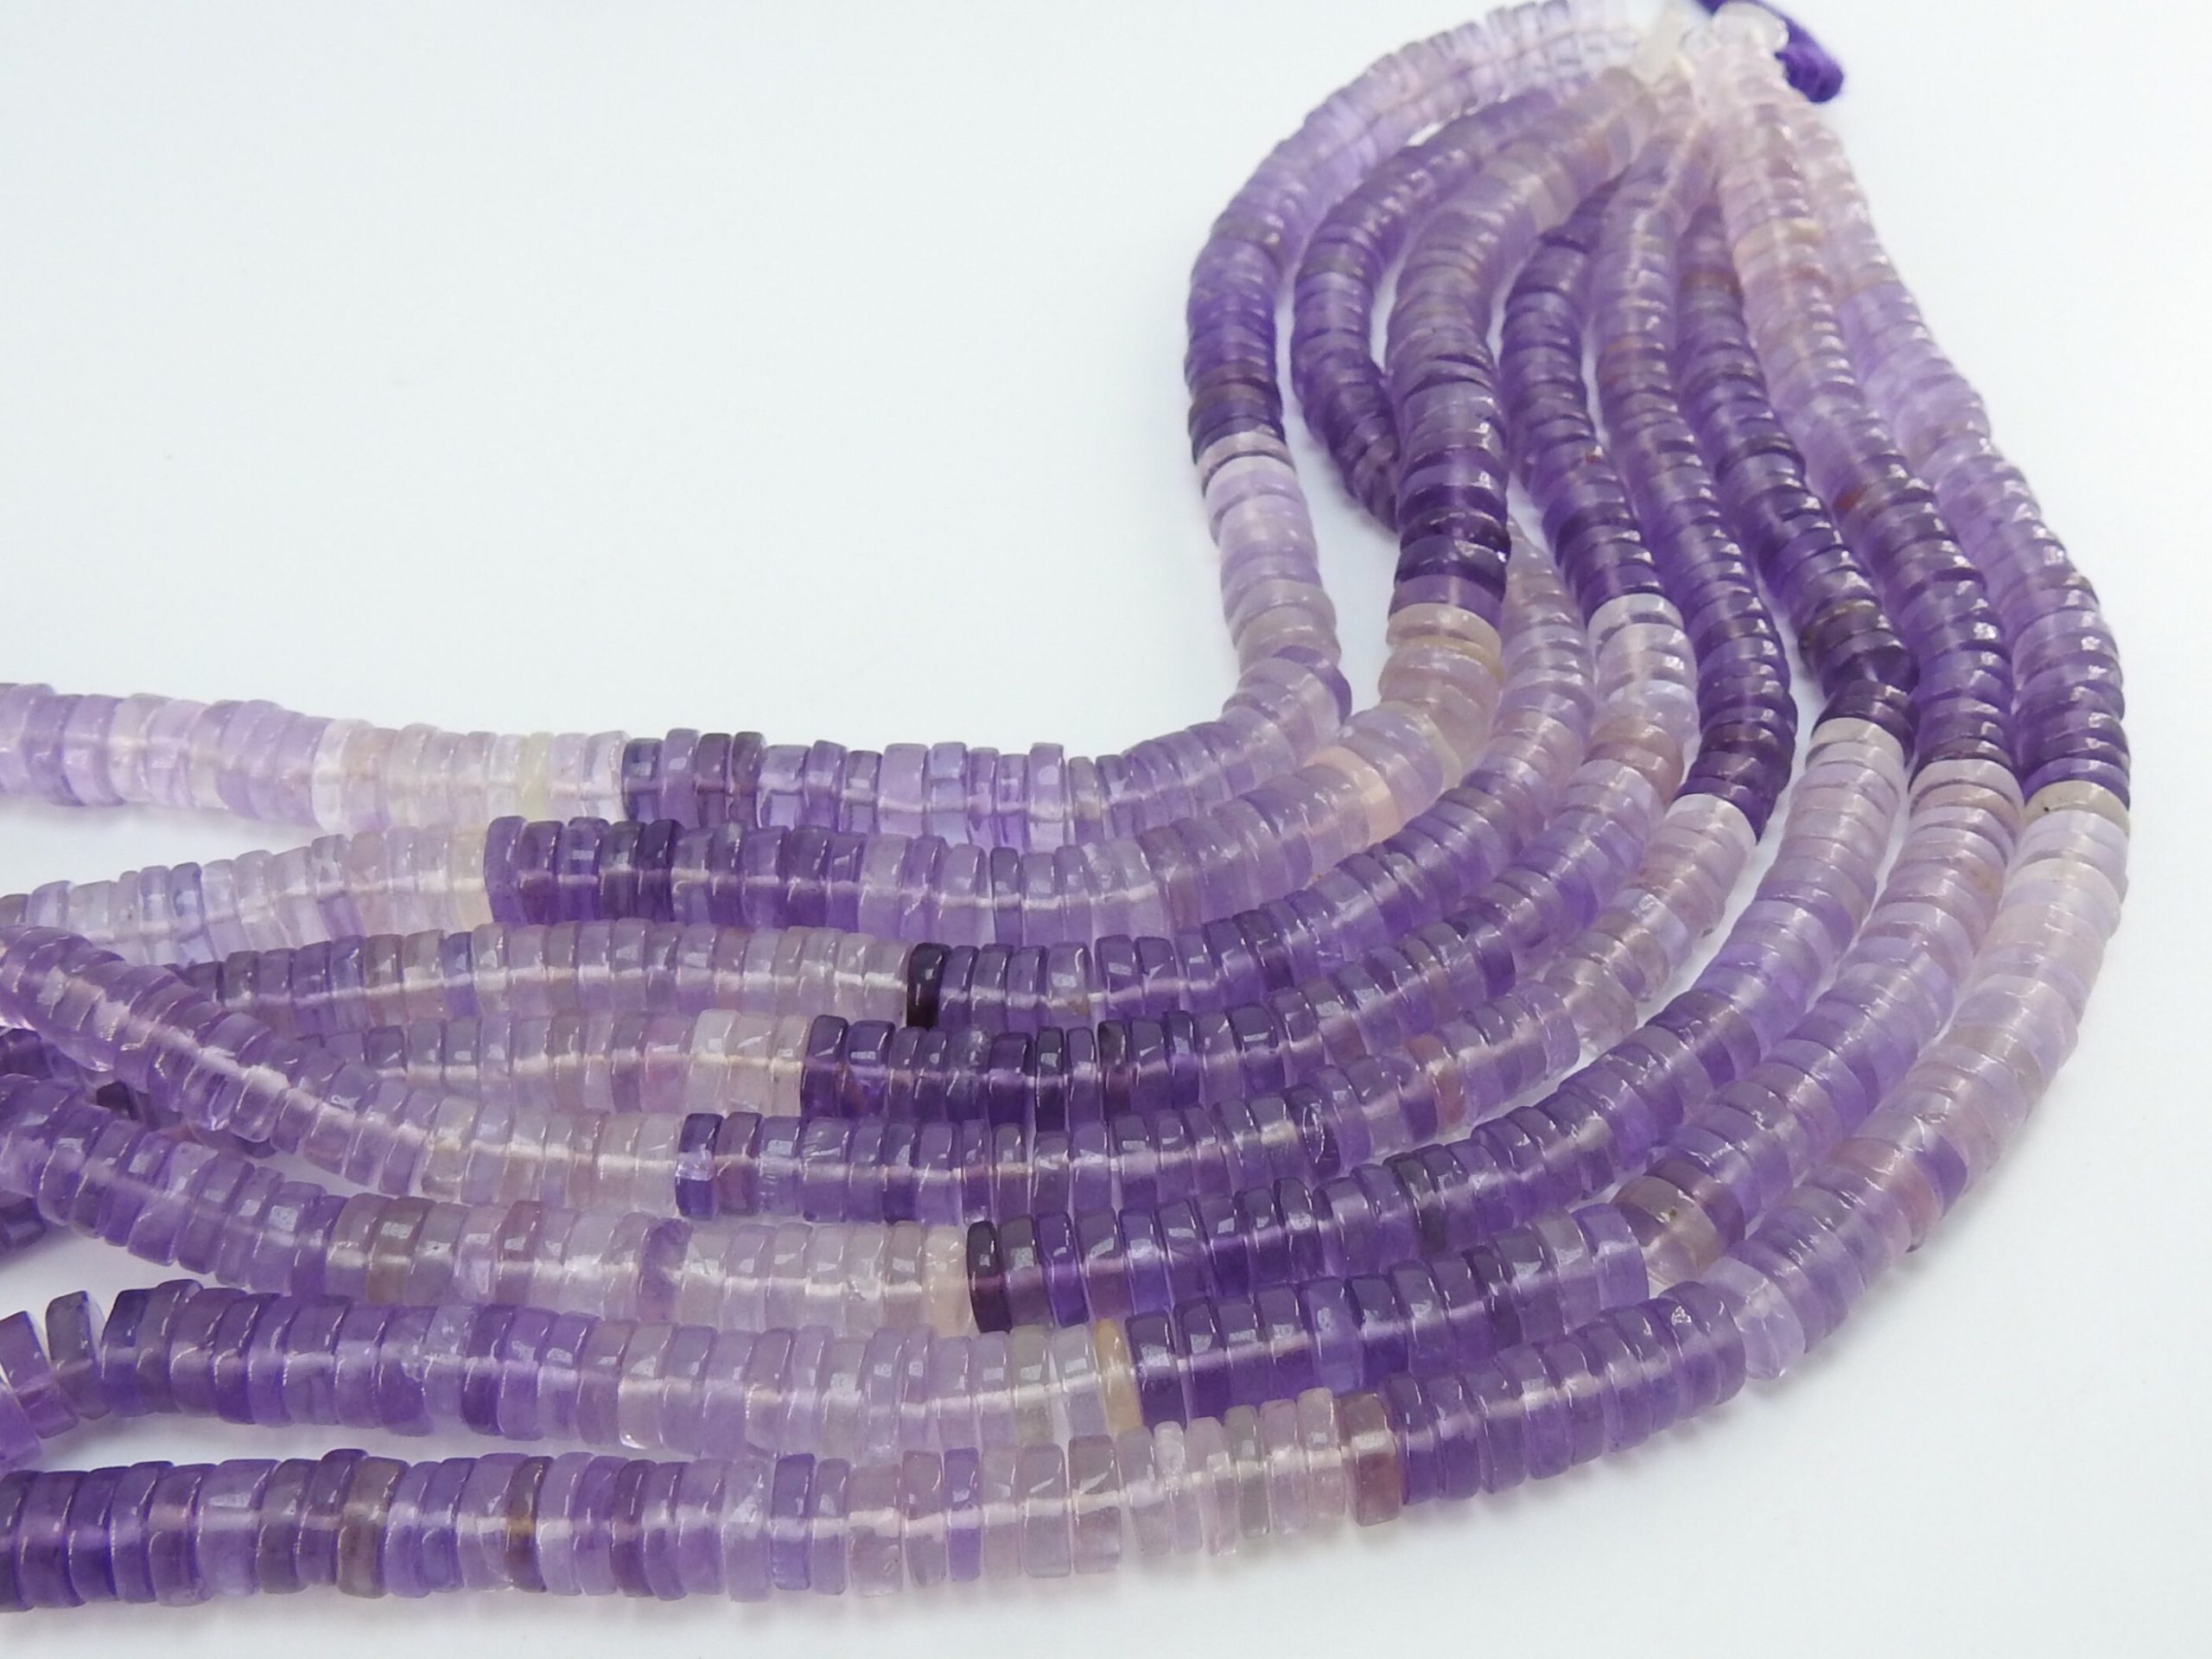 Natural Amethyst Smooth Tyre,Coin,Button,Wheel Shape Bead,Multi Shaded,Loose Stone,Wholesaler,Supplies New Arrival 16Inch Strand (Pme)T1 | Save 33% - Rajasthan Living 18